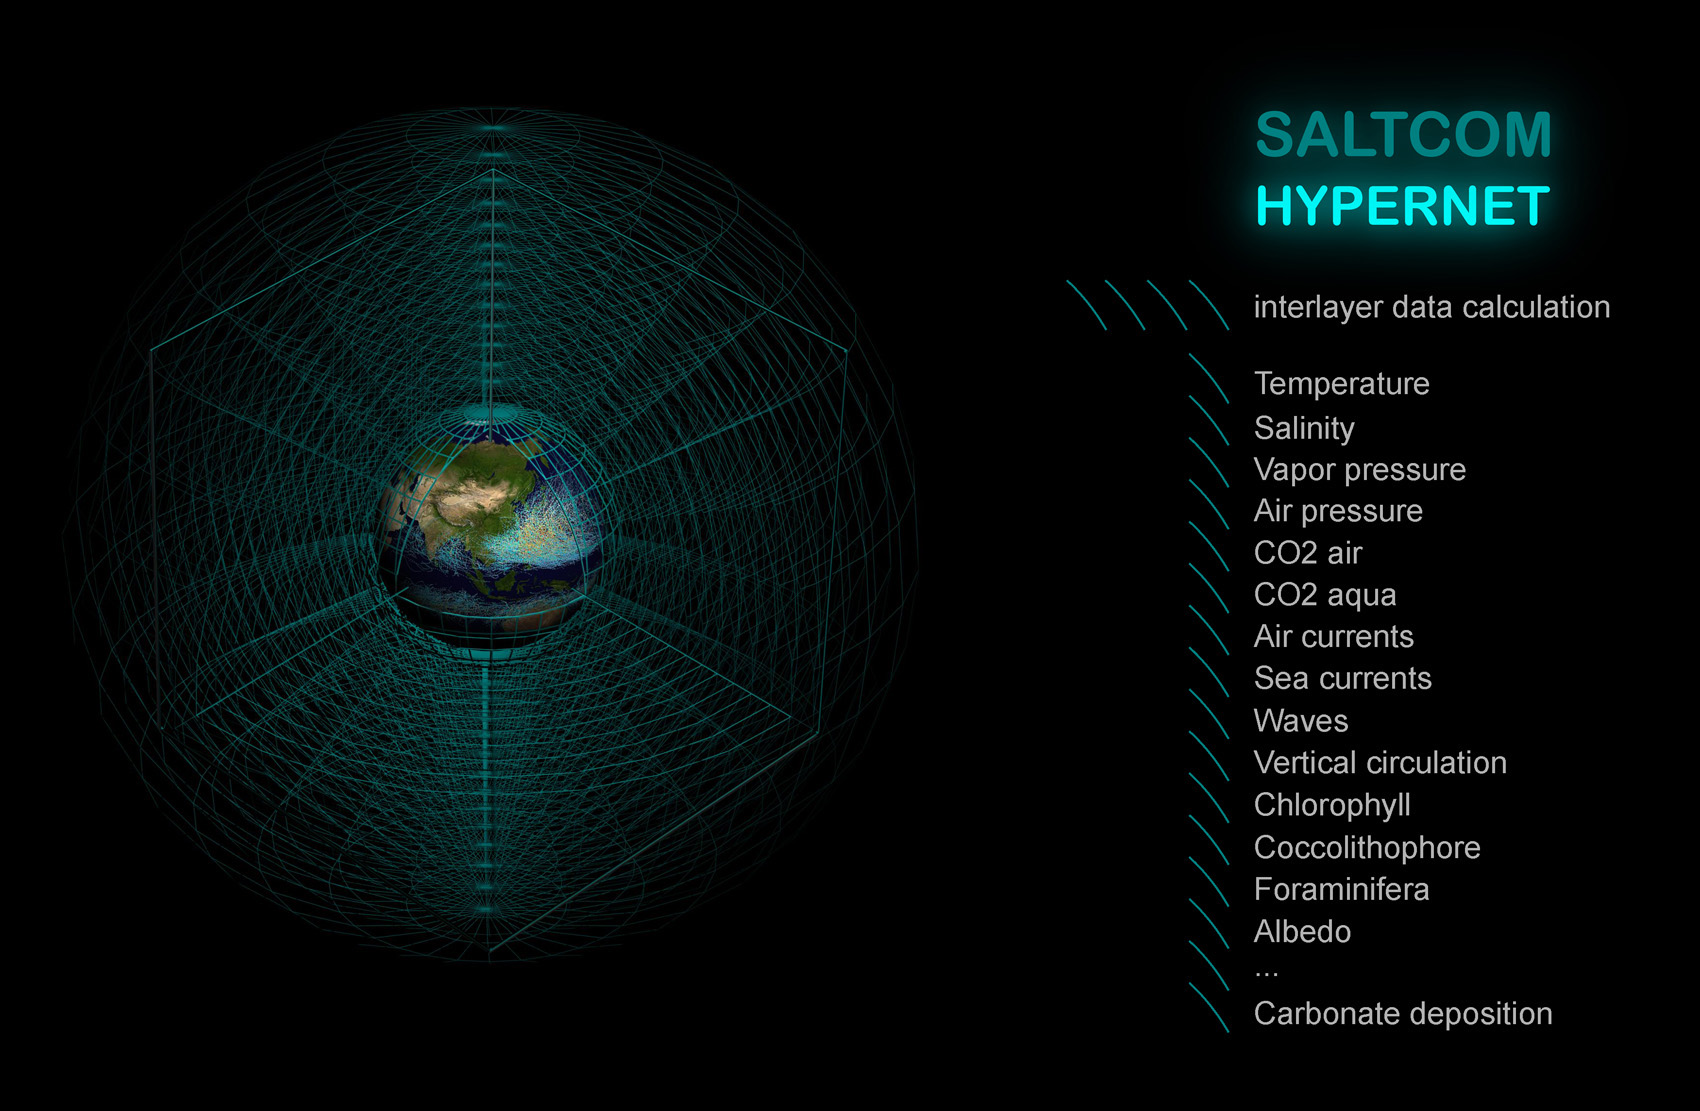  

SALTCOM HYPERNET is a portal to the world of supercomputers.

SALTCOM HYPERNET is the solution to global warming.

We can STOP GLOBAL WARMING! 

SALTCOM.ORG
  
